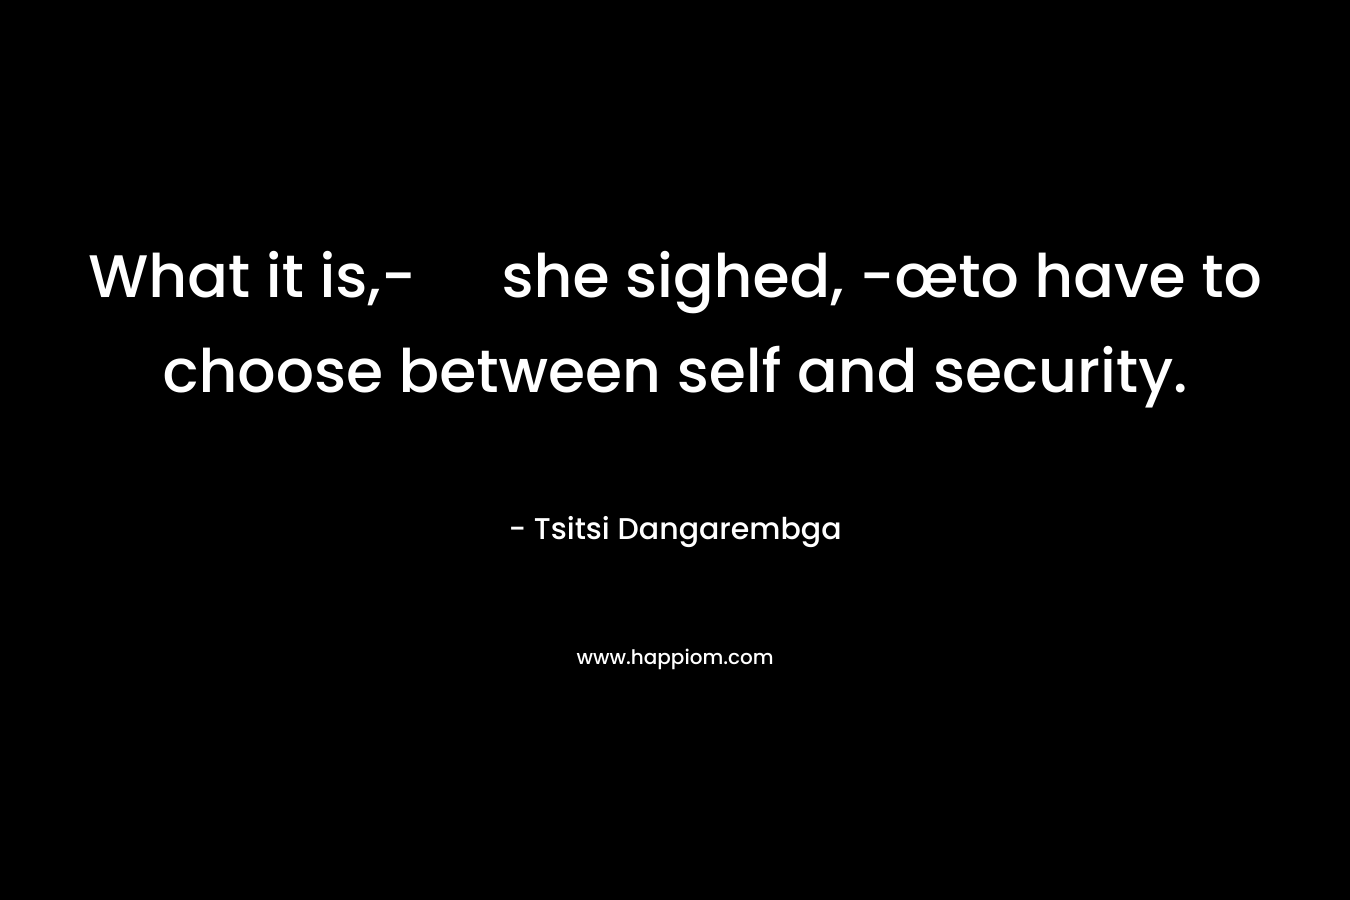 What it is,- she sighed, -œto have to choose between self and security.